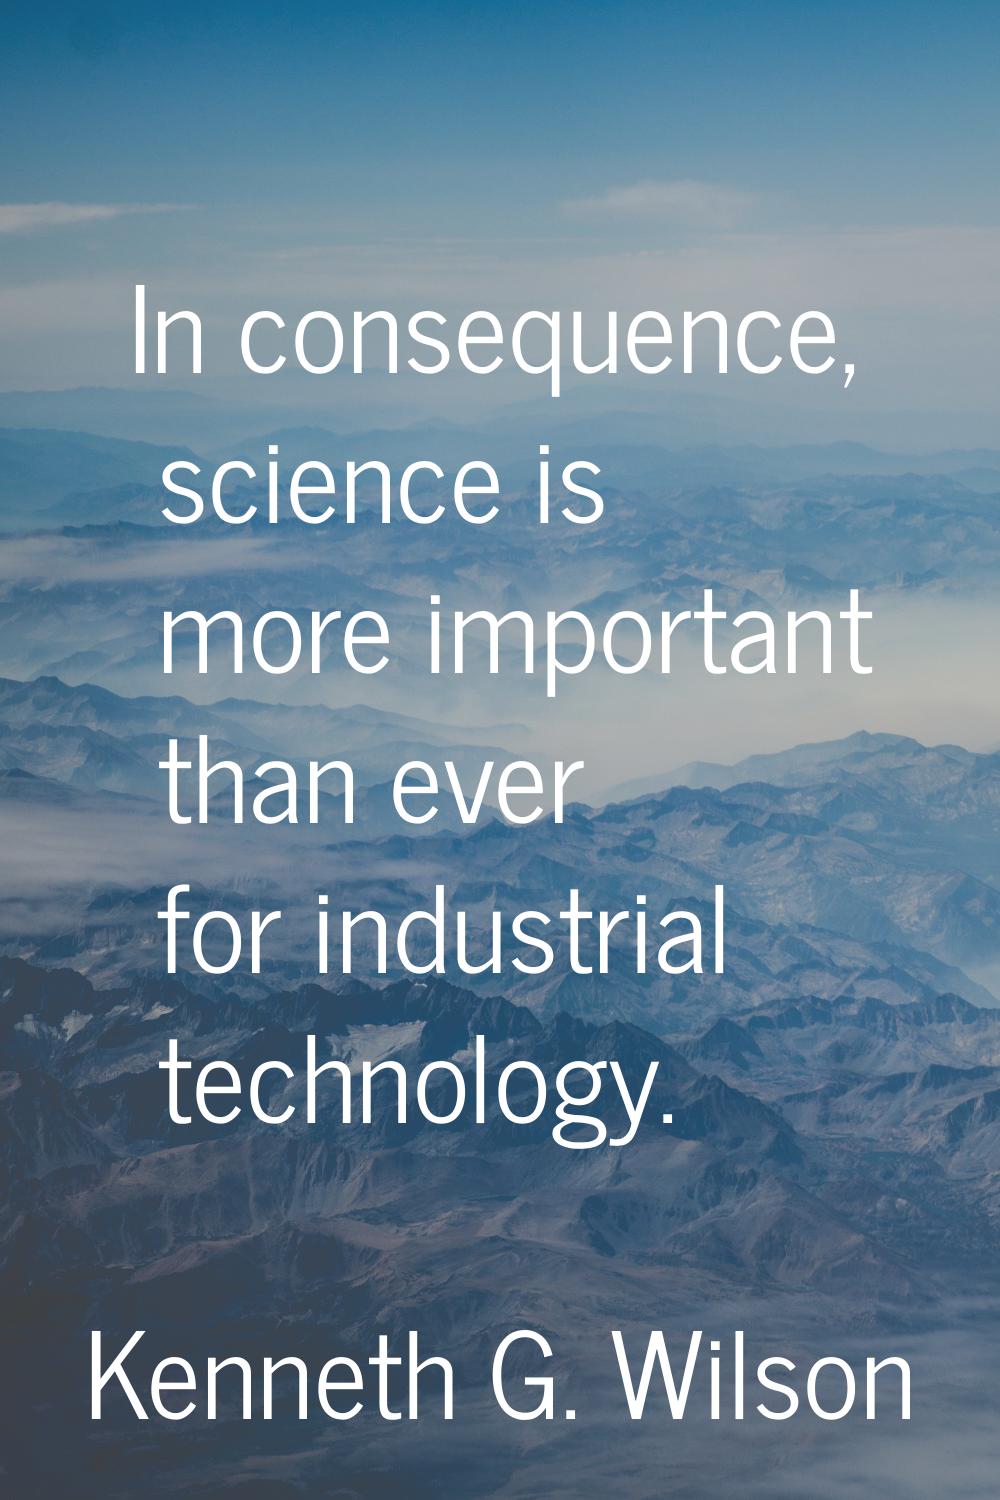 In consequence, science is more important than ever for industrial technology.